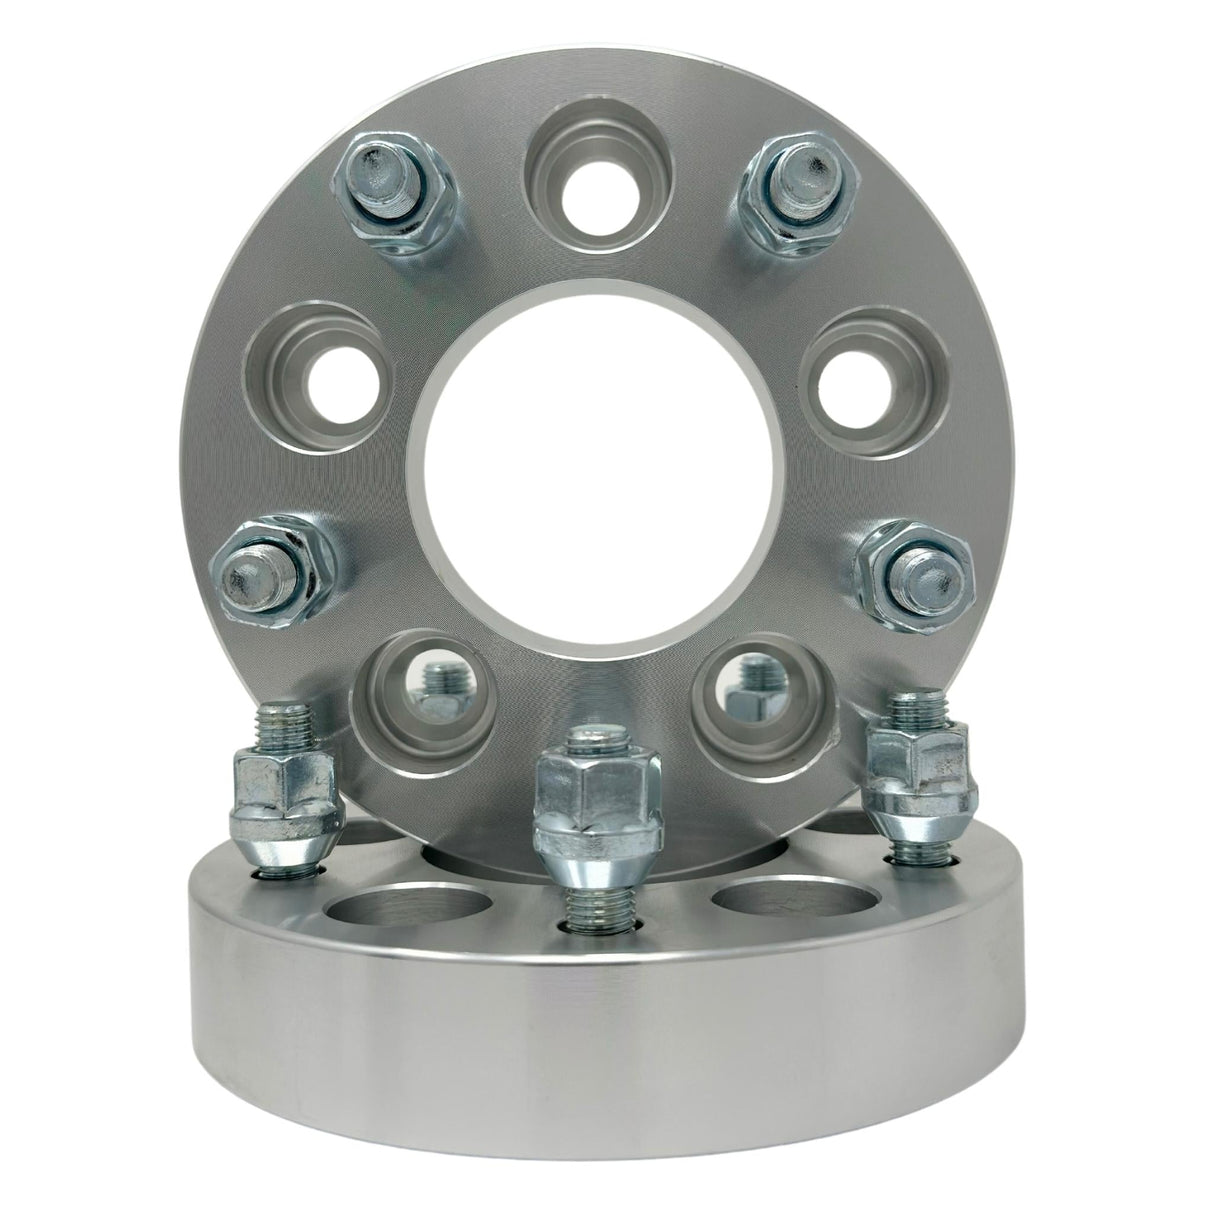 Chevy 5x120 to 5x115 Dodge Wheel Adapters Hub Centric 15mm 14x1.5 Studs & Lug Nuts 66.9 OEM Chevy / GM  Center Bore For Corevtte C8, 2010+ Camaro, CTS-V, ATS-V, Impala, Malibu + More